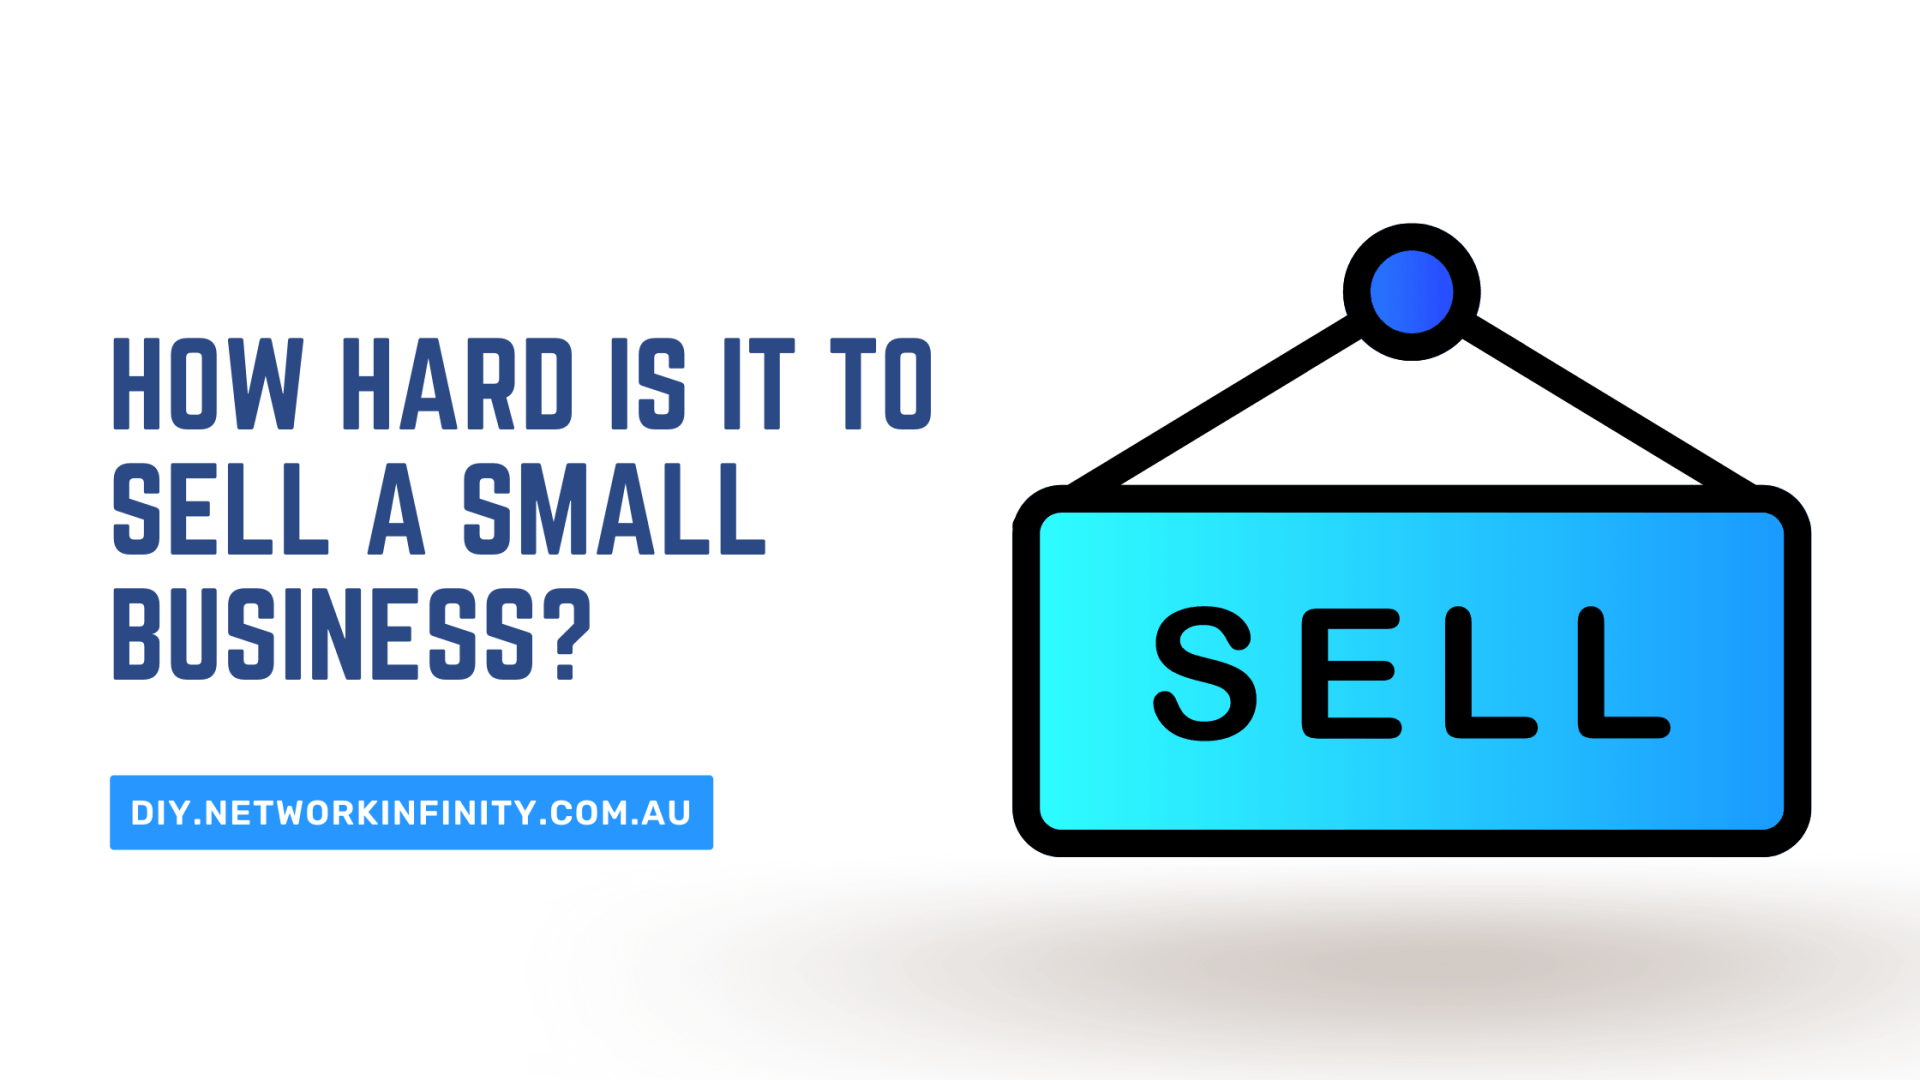 How Hard Is It To Sell A Small Business?